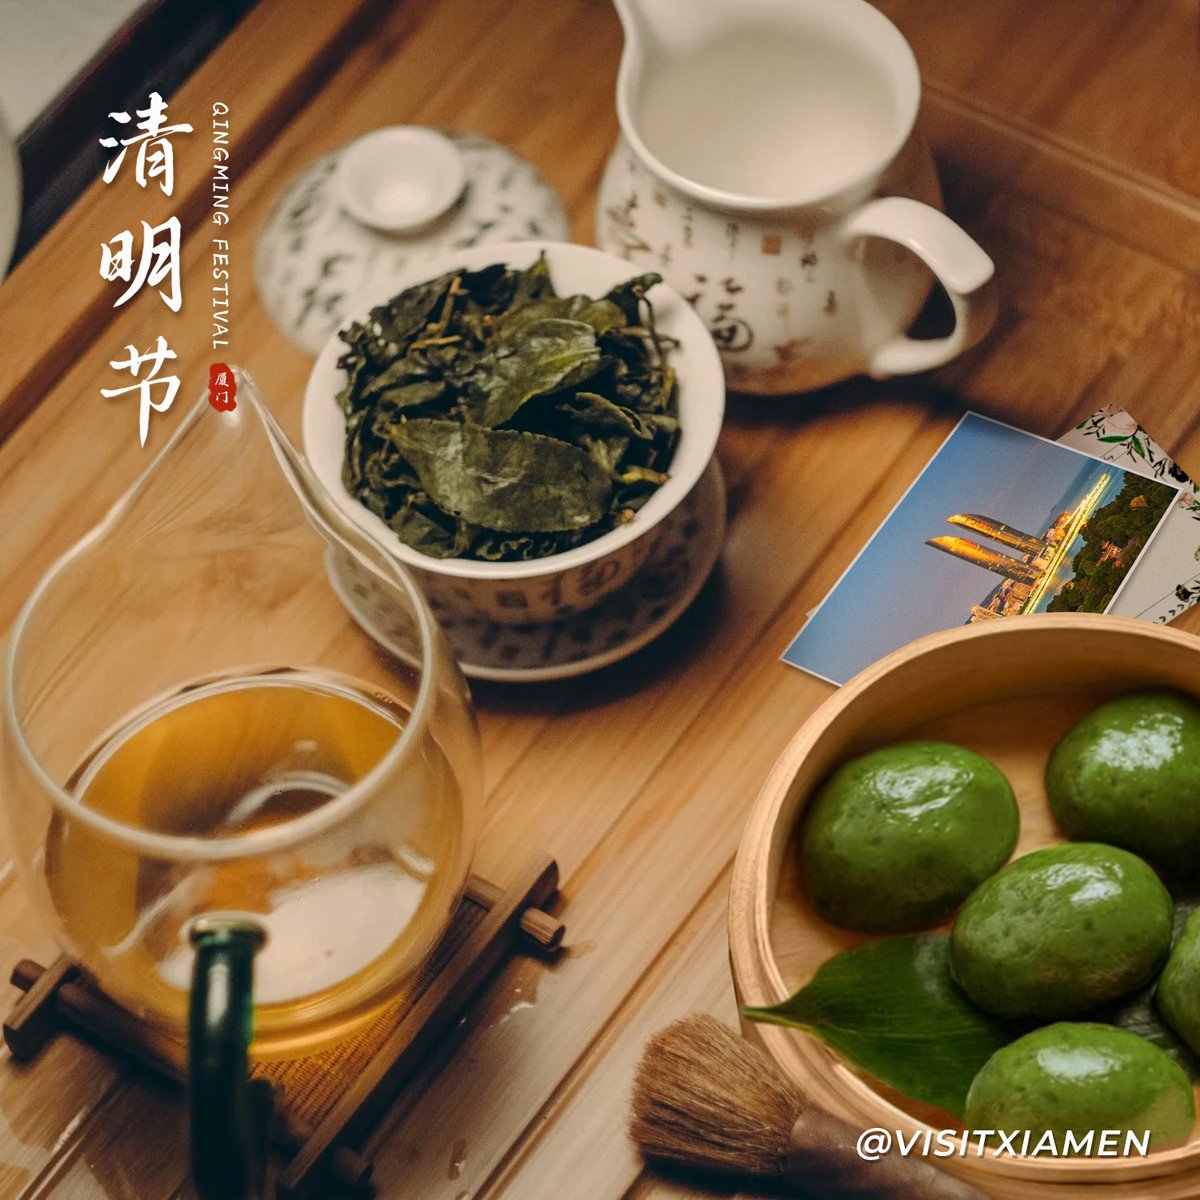 #Qingming is a traditional Chinese Solar Term and a festival to memorize ancestors. In Xiamen, people make and enjoy Qingming Geh (a glutinous rice cake) or Qingtuan with a refreshing cup of tea to truly embrace the beauty of spring. #VisitXiamen #LifeisXiamen